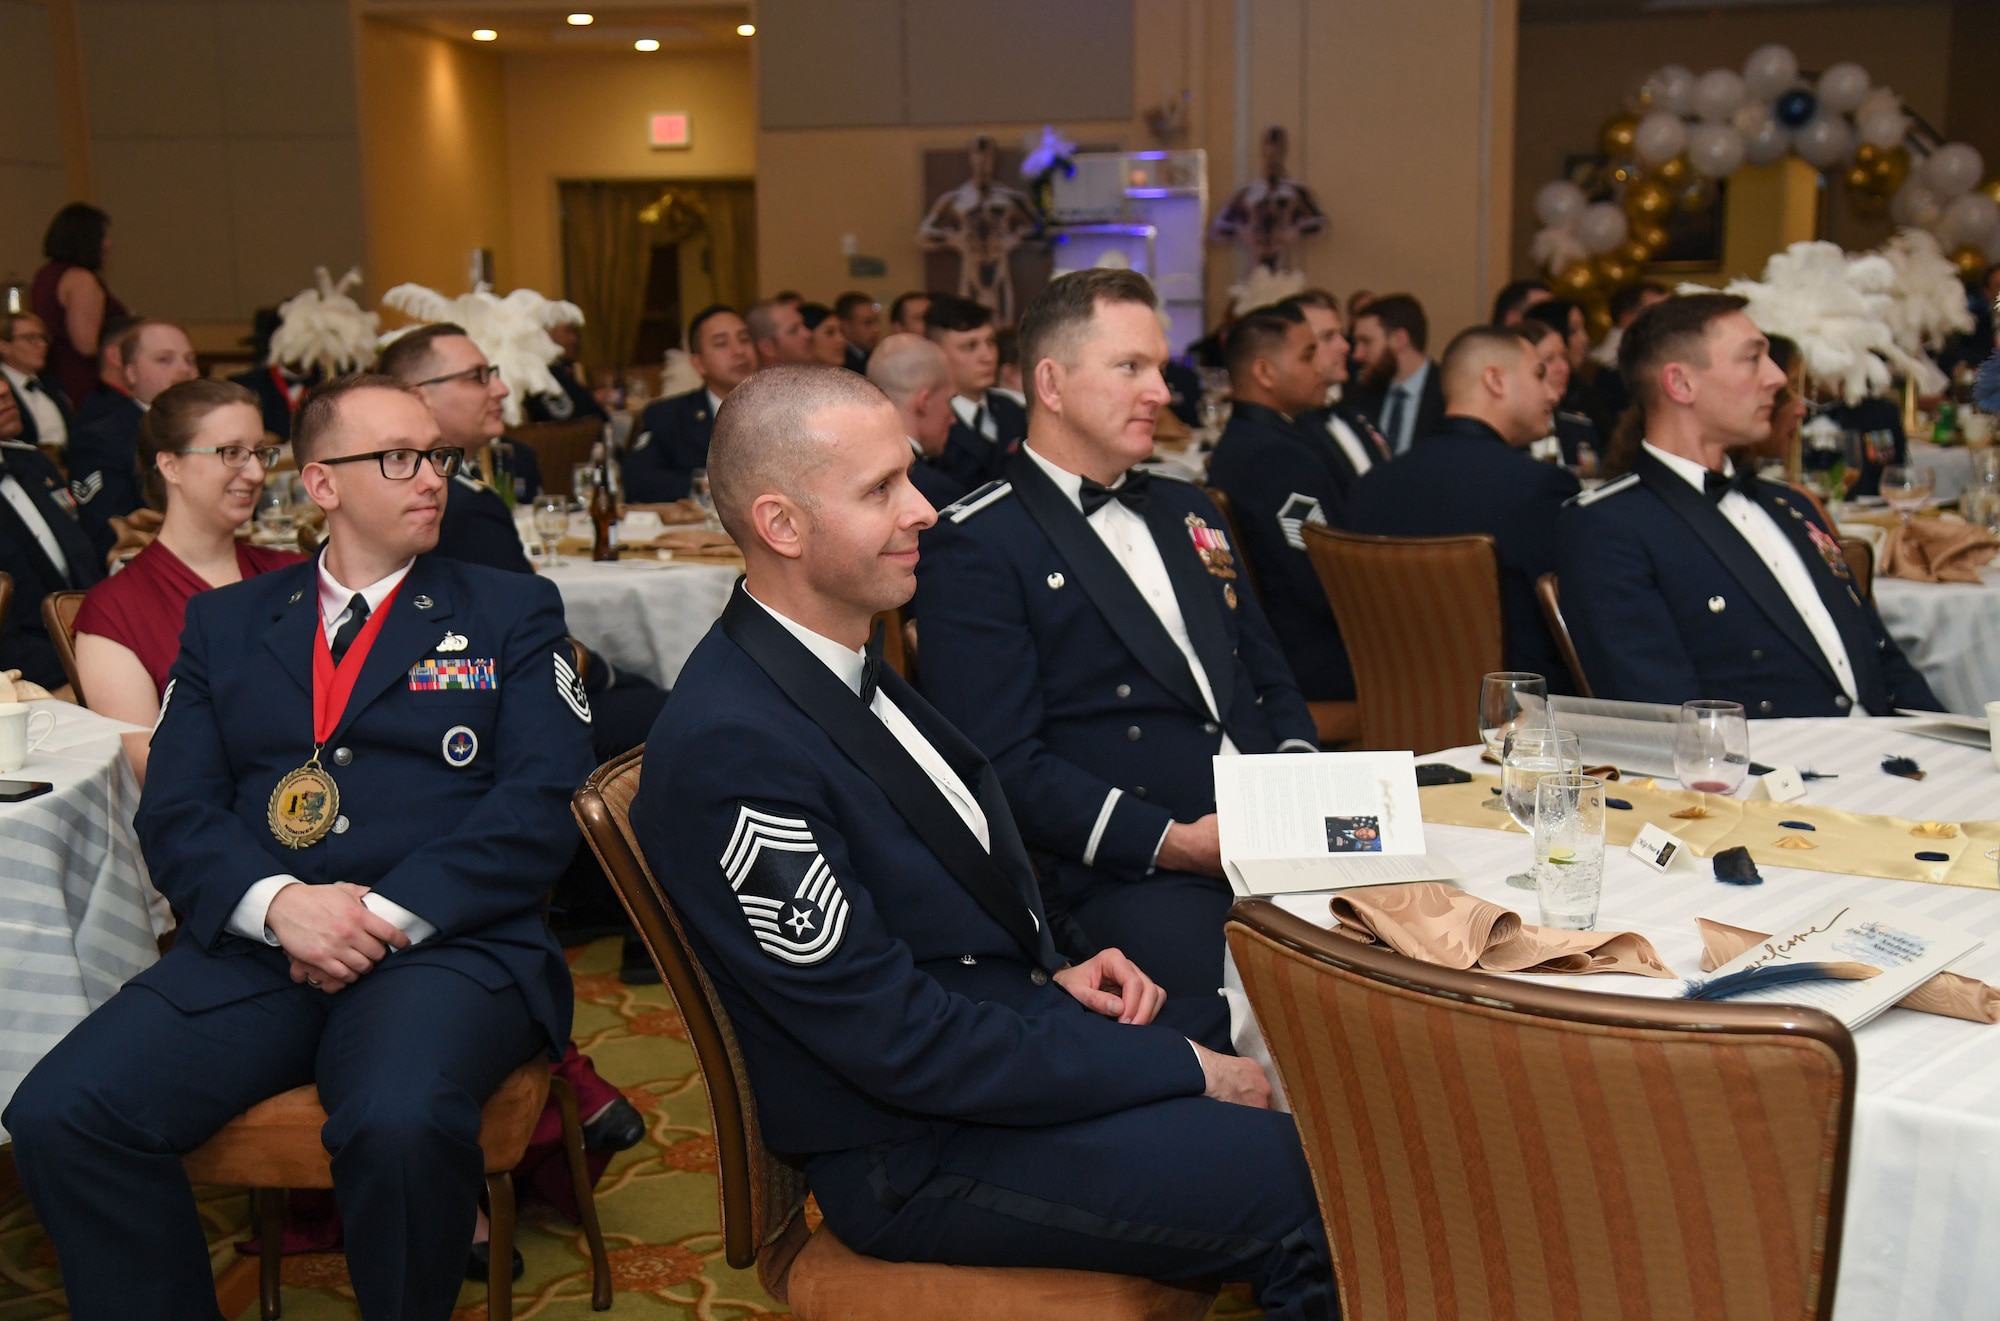 Keesler personnel attend the 81st Training Wing's 2022 Annual Awards Ceremony inside the Bay Breeze Event Center at Keesler Air Force Base, Mississippi, Feb. 24, 2023.